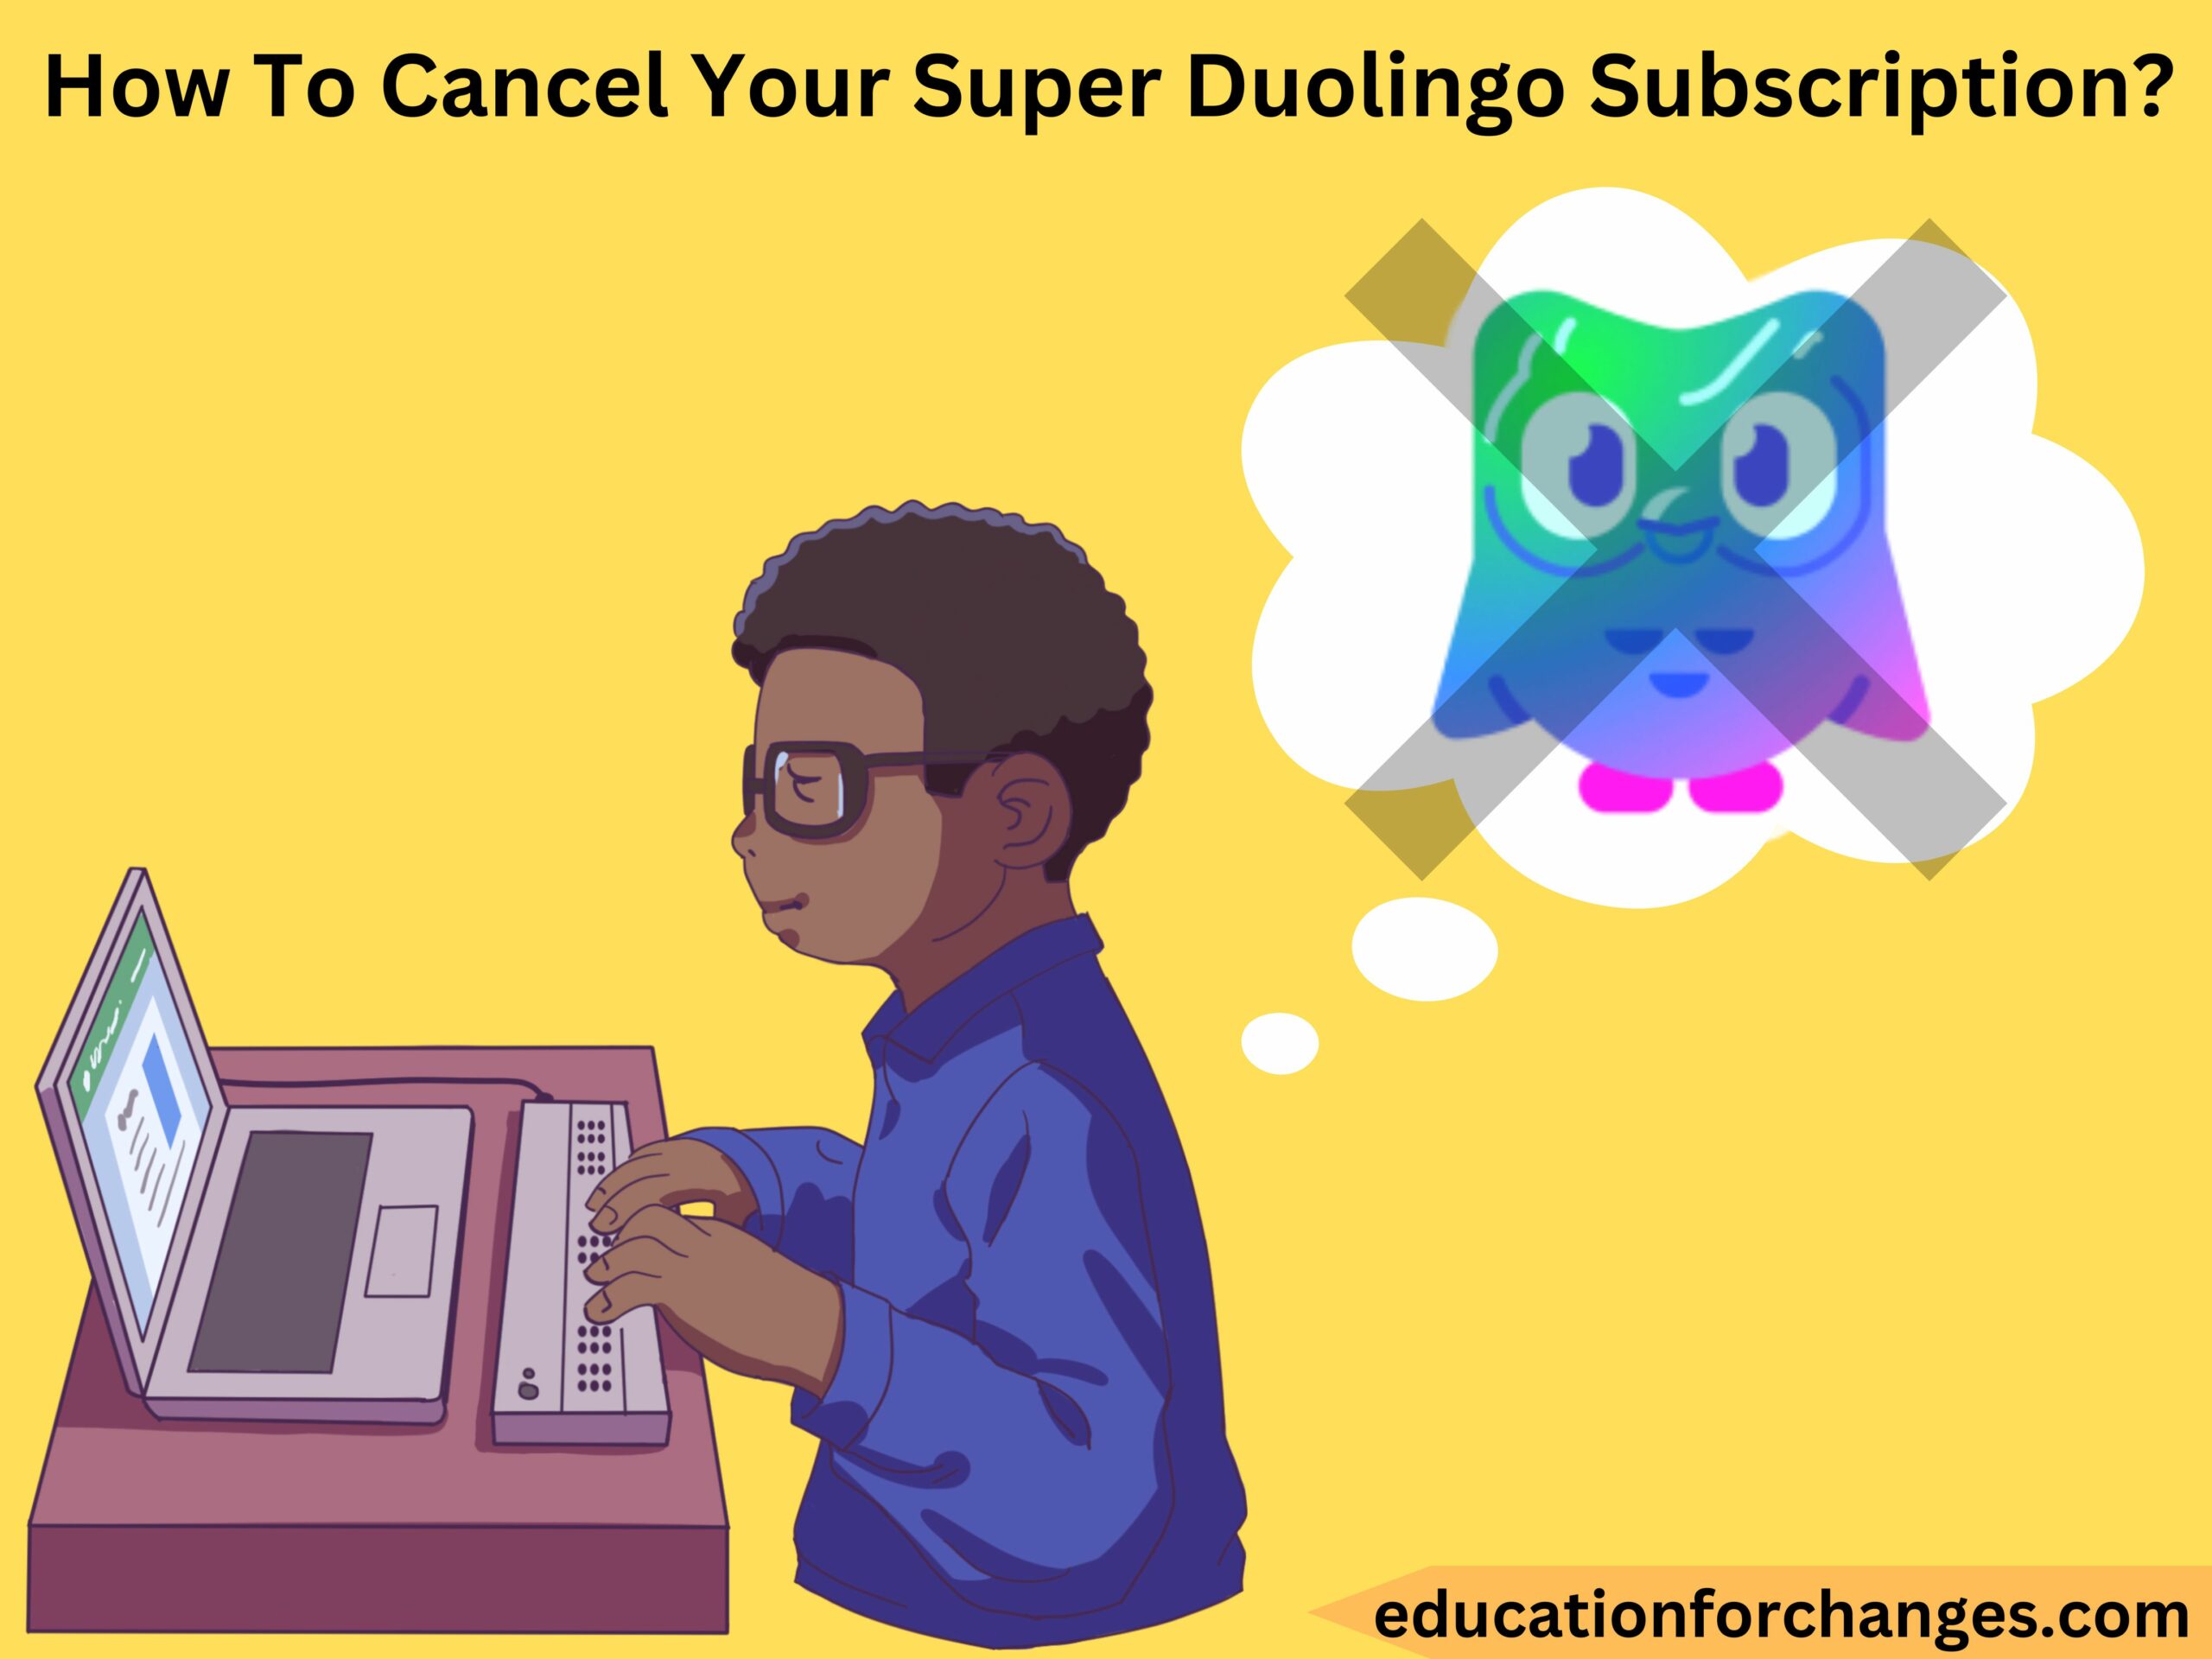 How To Cancel Your Super Duolingo Subscription (Step-by-Step Guide)